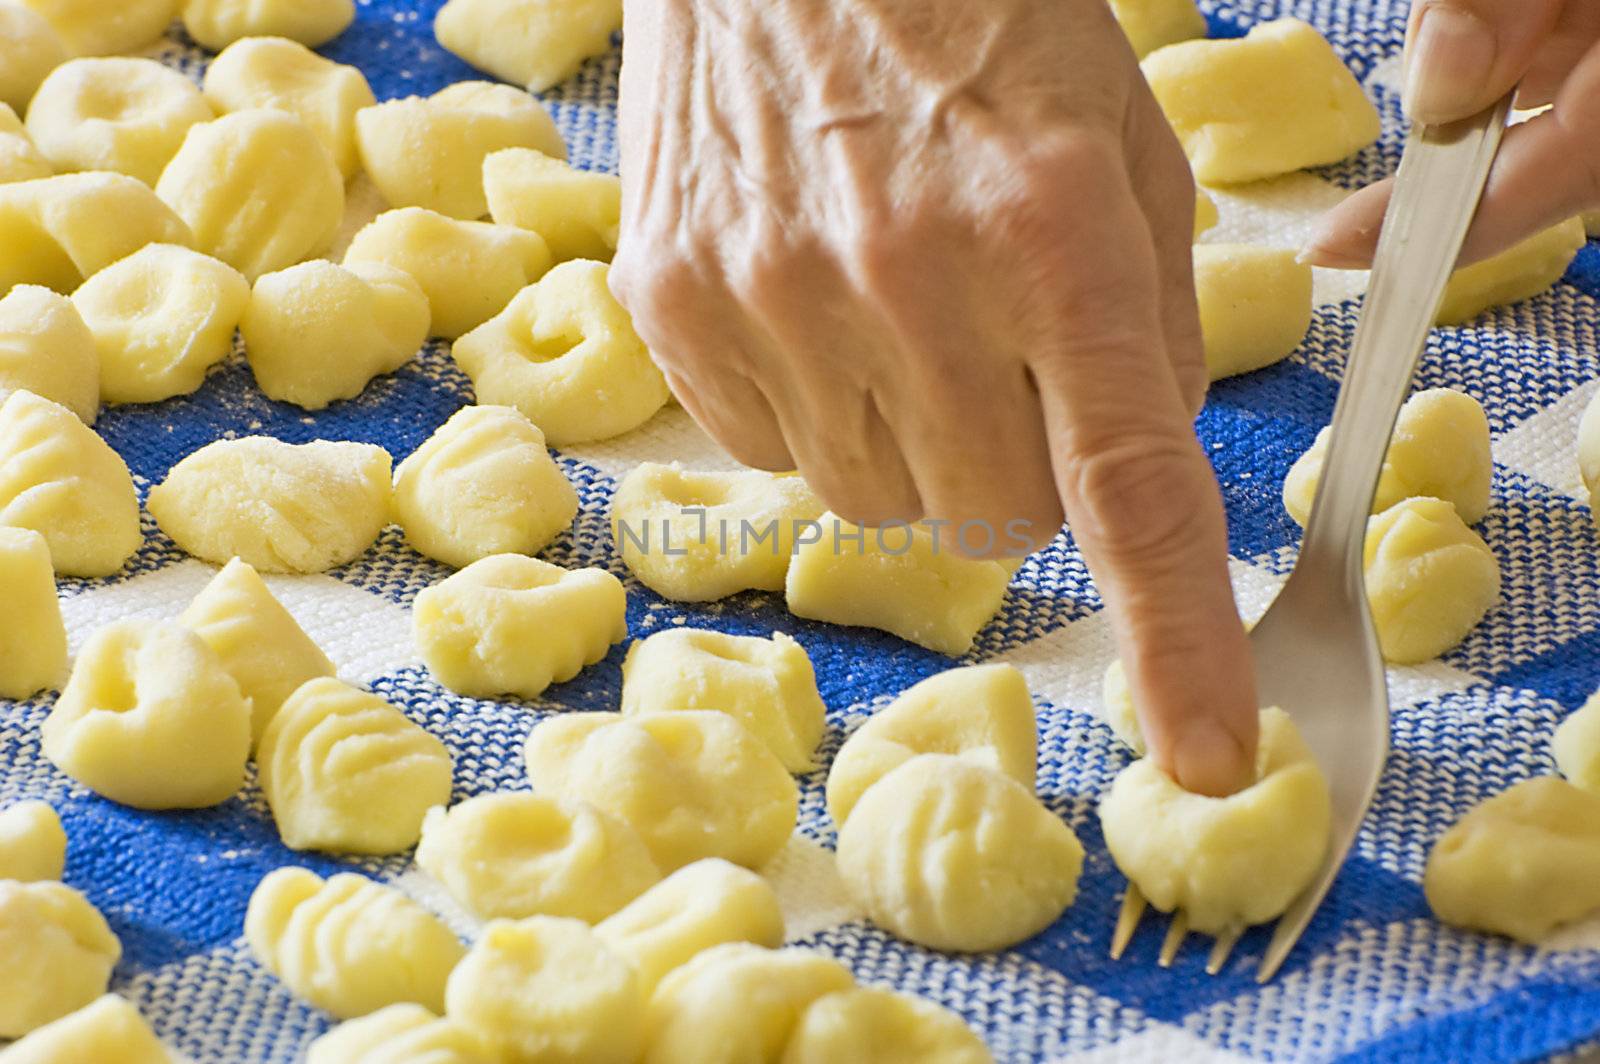 Making groove in gnocchi with fork